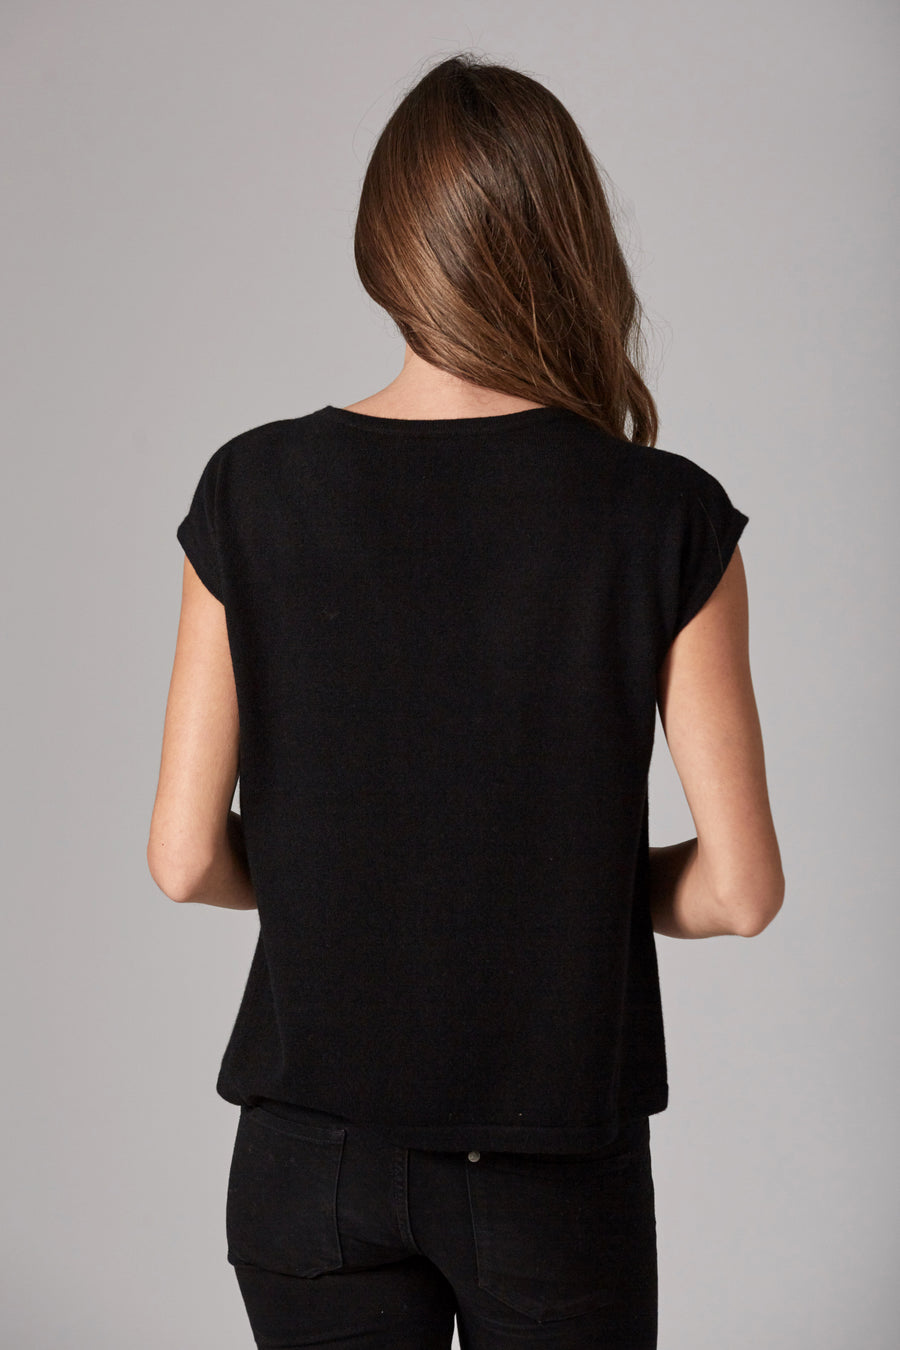 pine cashmere hailey sleeveless women's 100% pure cashmere crewneck top in black